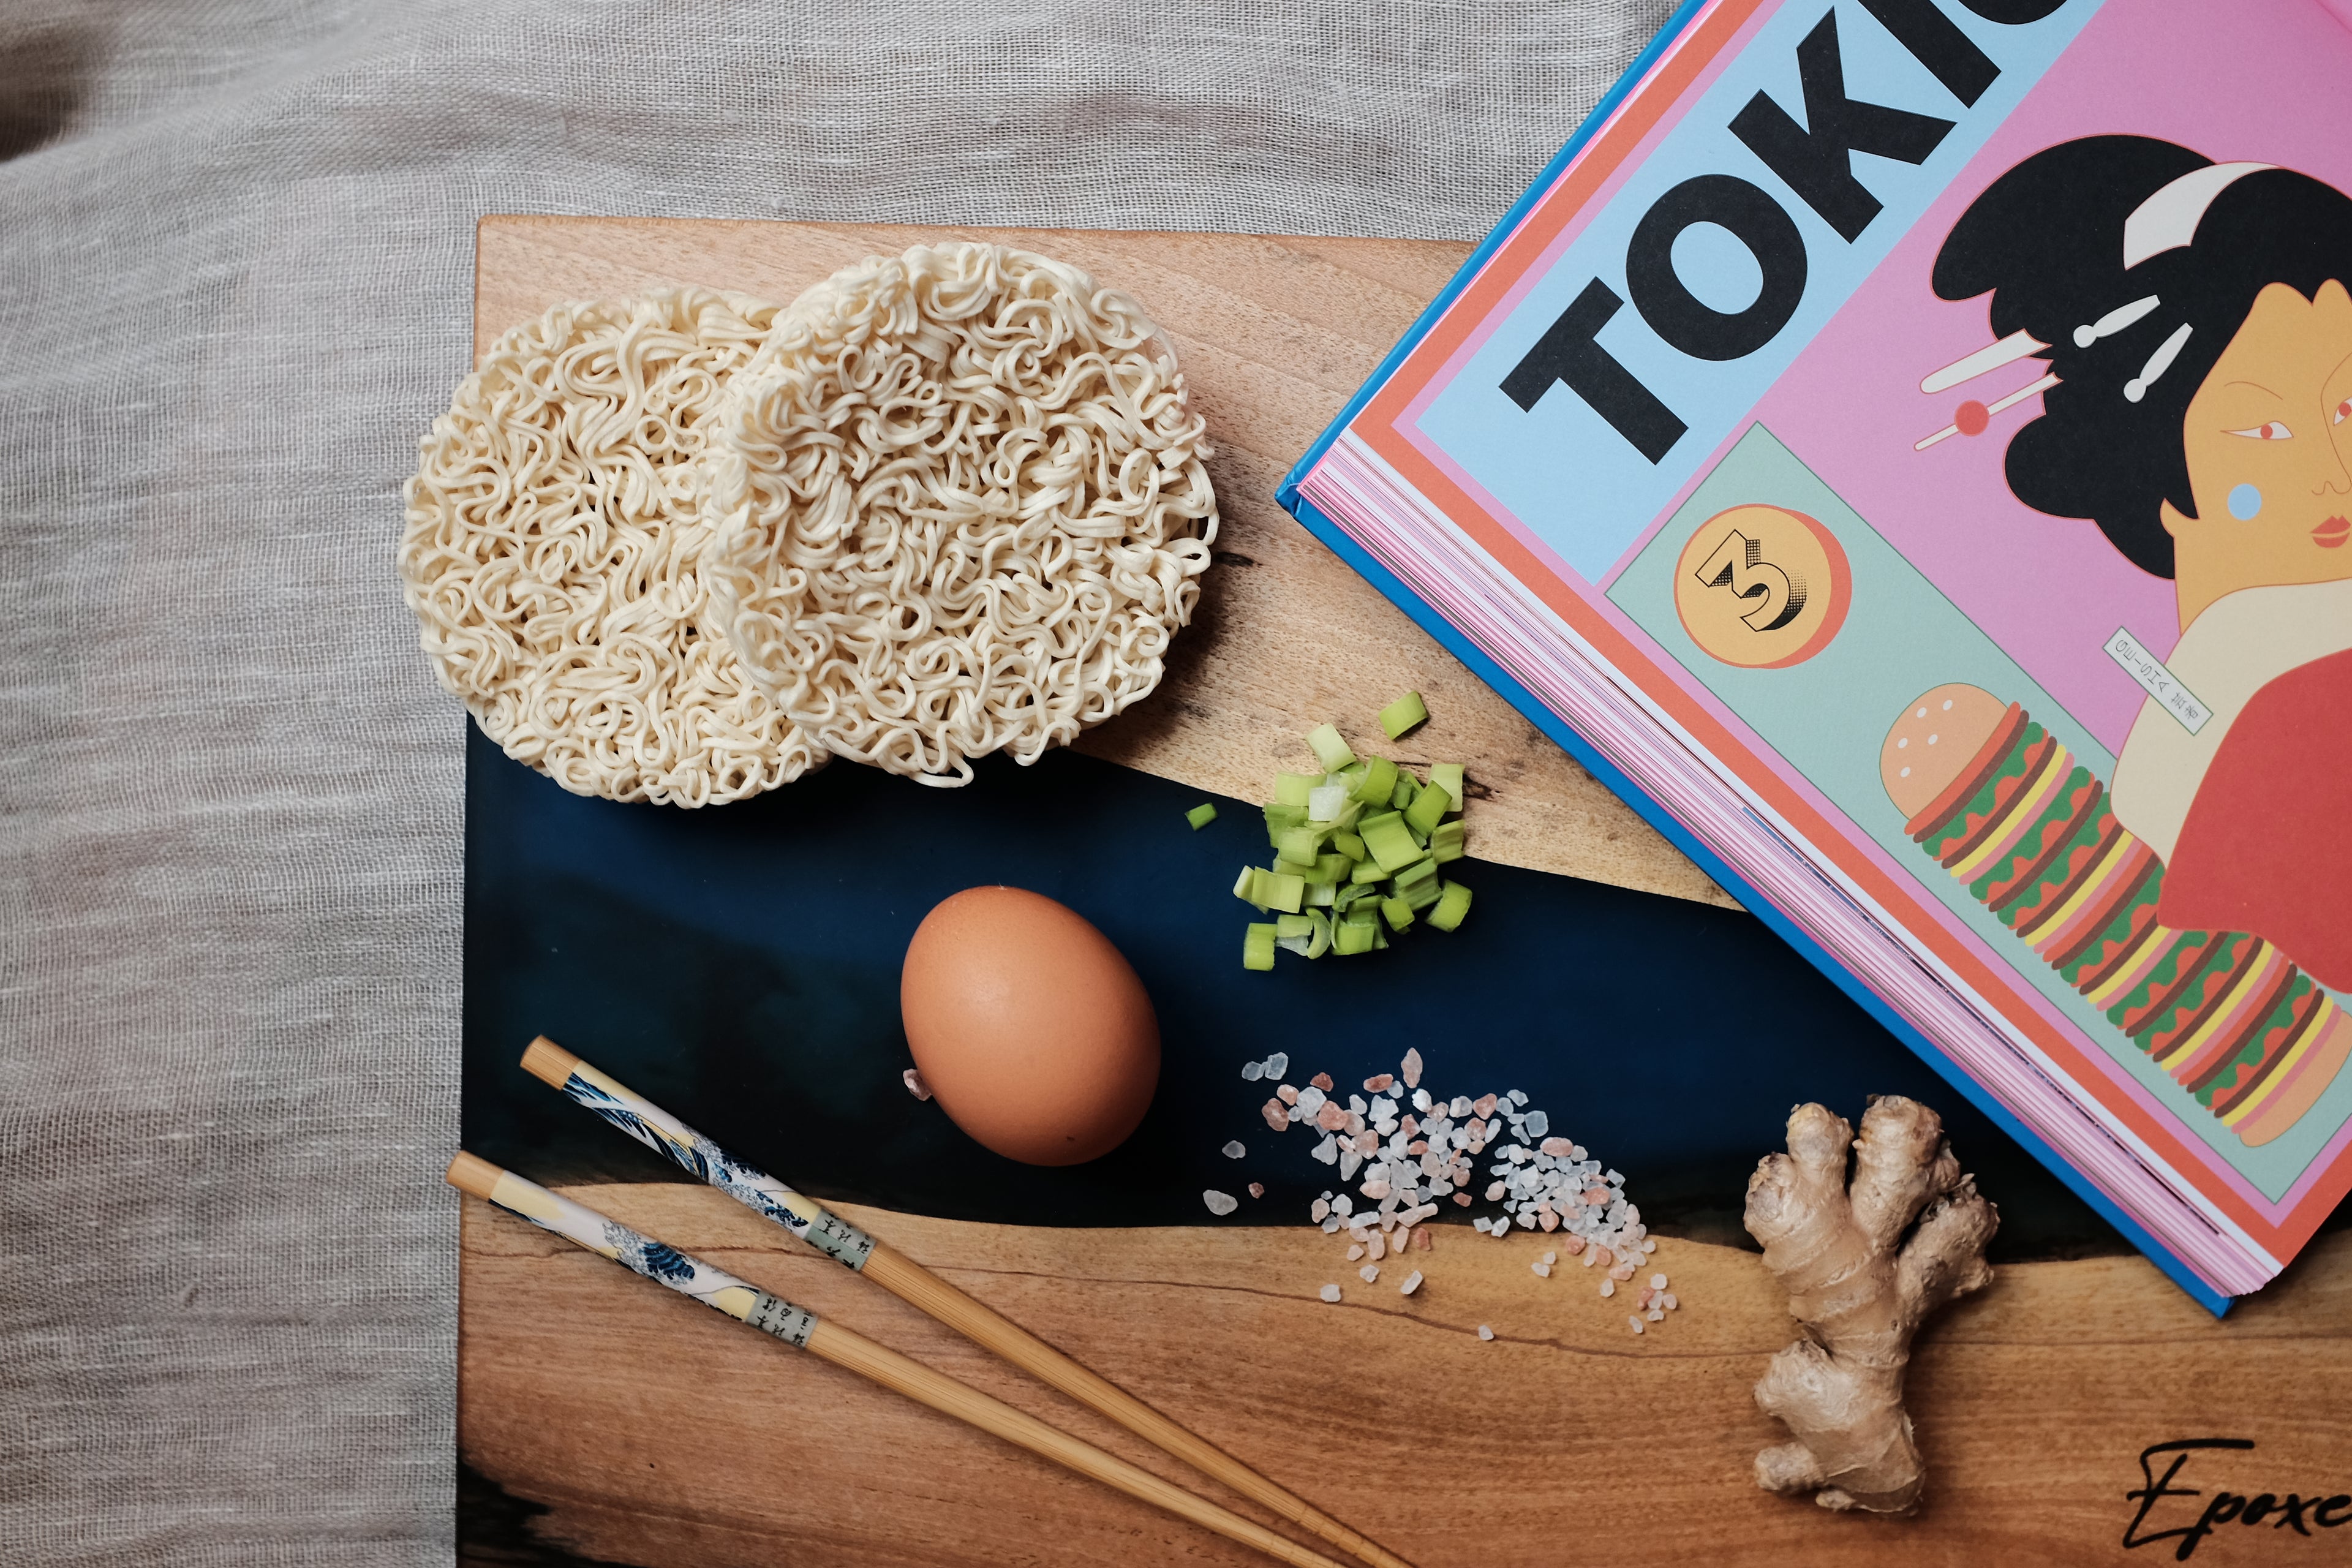 Epoxy blue wooden board adorned with a delightful arrangement of noodles, eggs, chopsticks, and a Tokyo street food coffee table book - an enticing fusion of aesthetics and gastronomy, capturing the essence of vibrant culinary culture in Tokyo